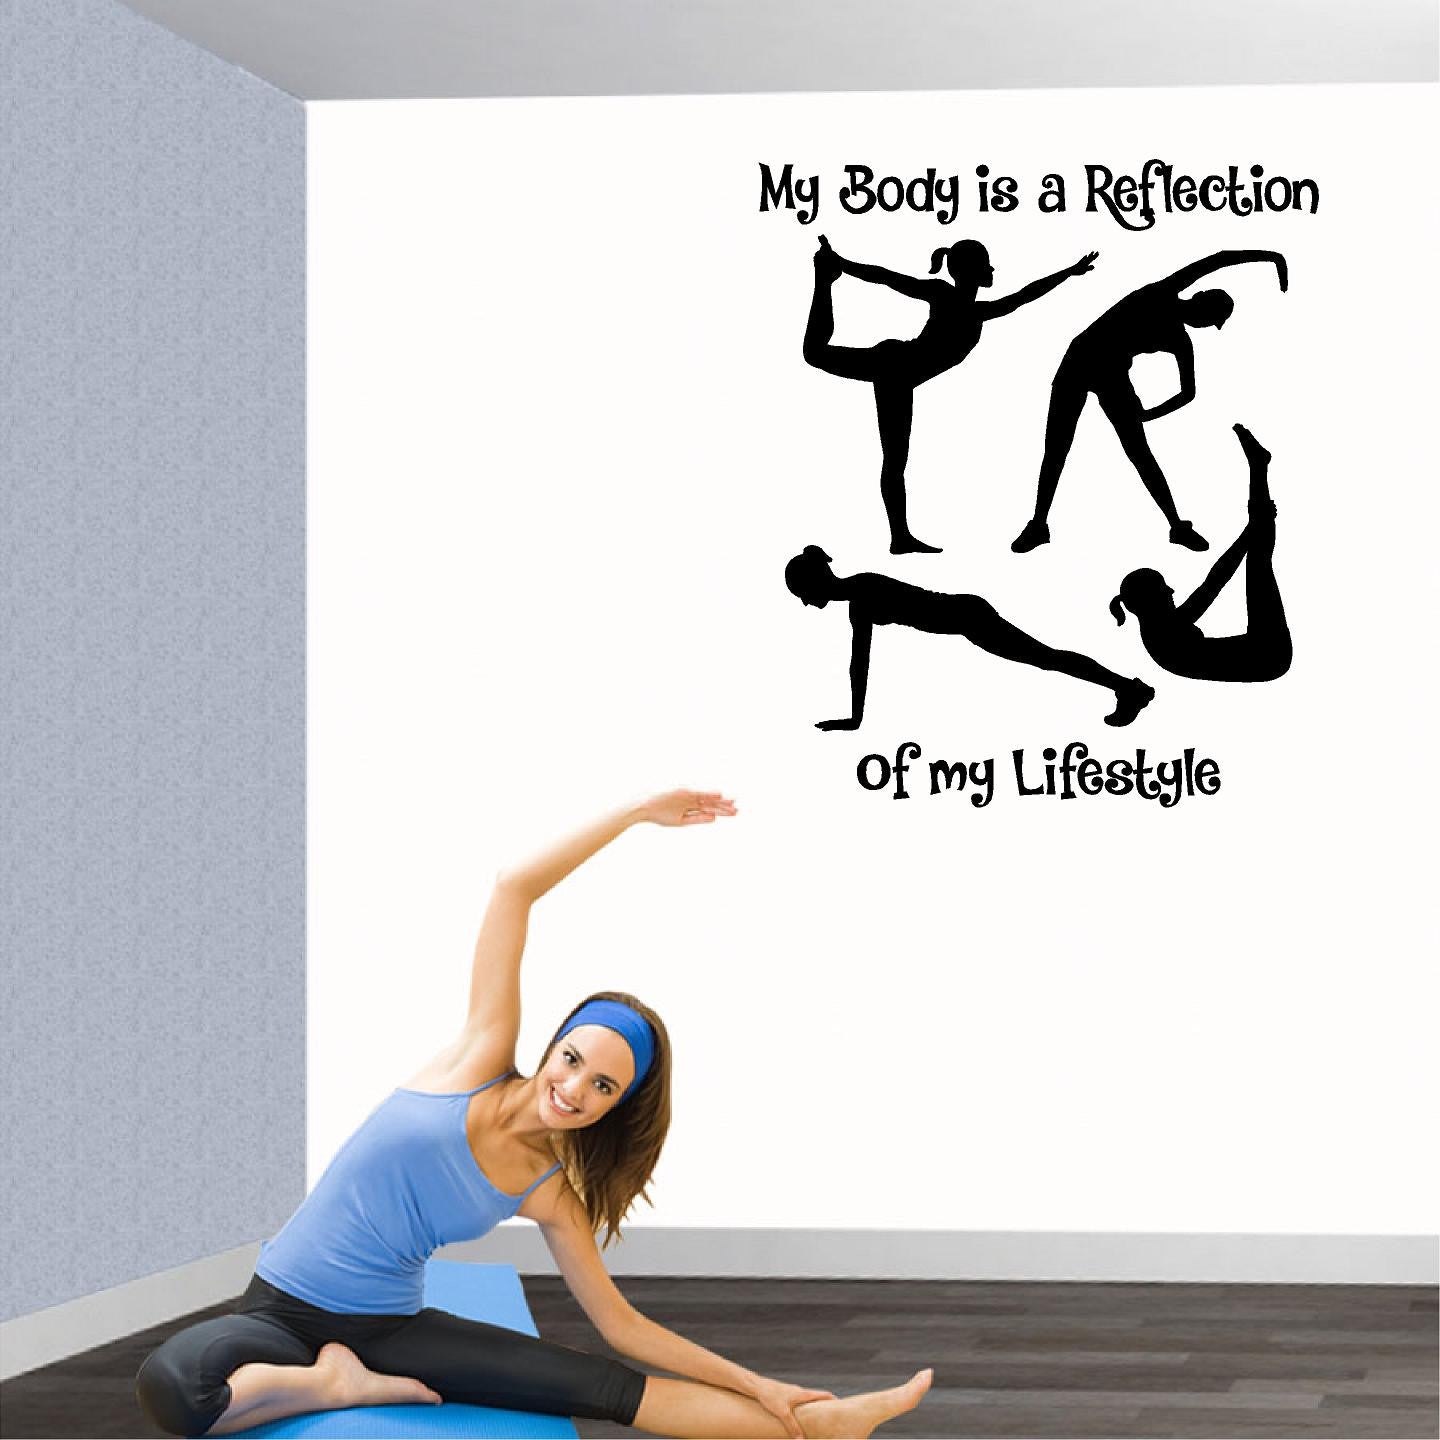 Stickers. Vinyl Wall Decal. Fitness. Gym. Exercise: My Body is a reflection of my Lifestyle